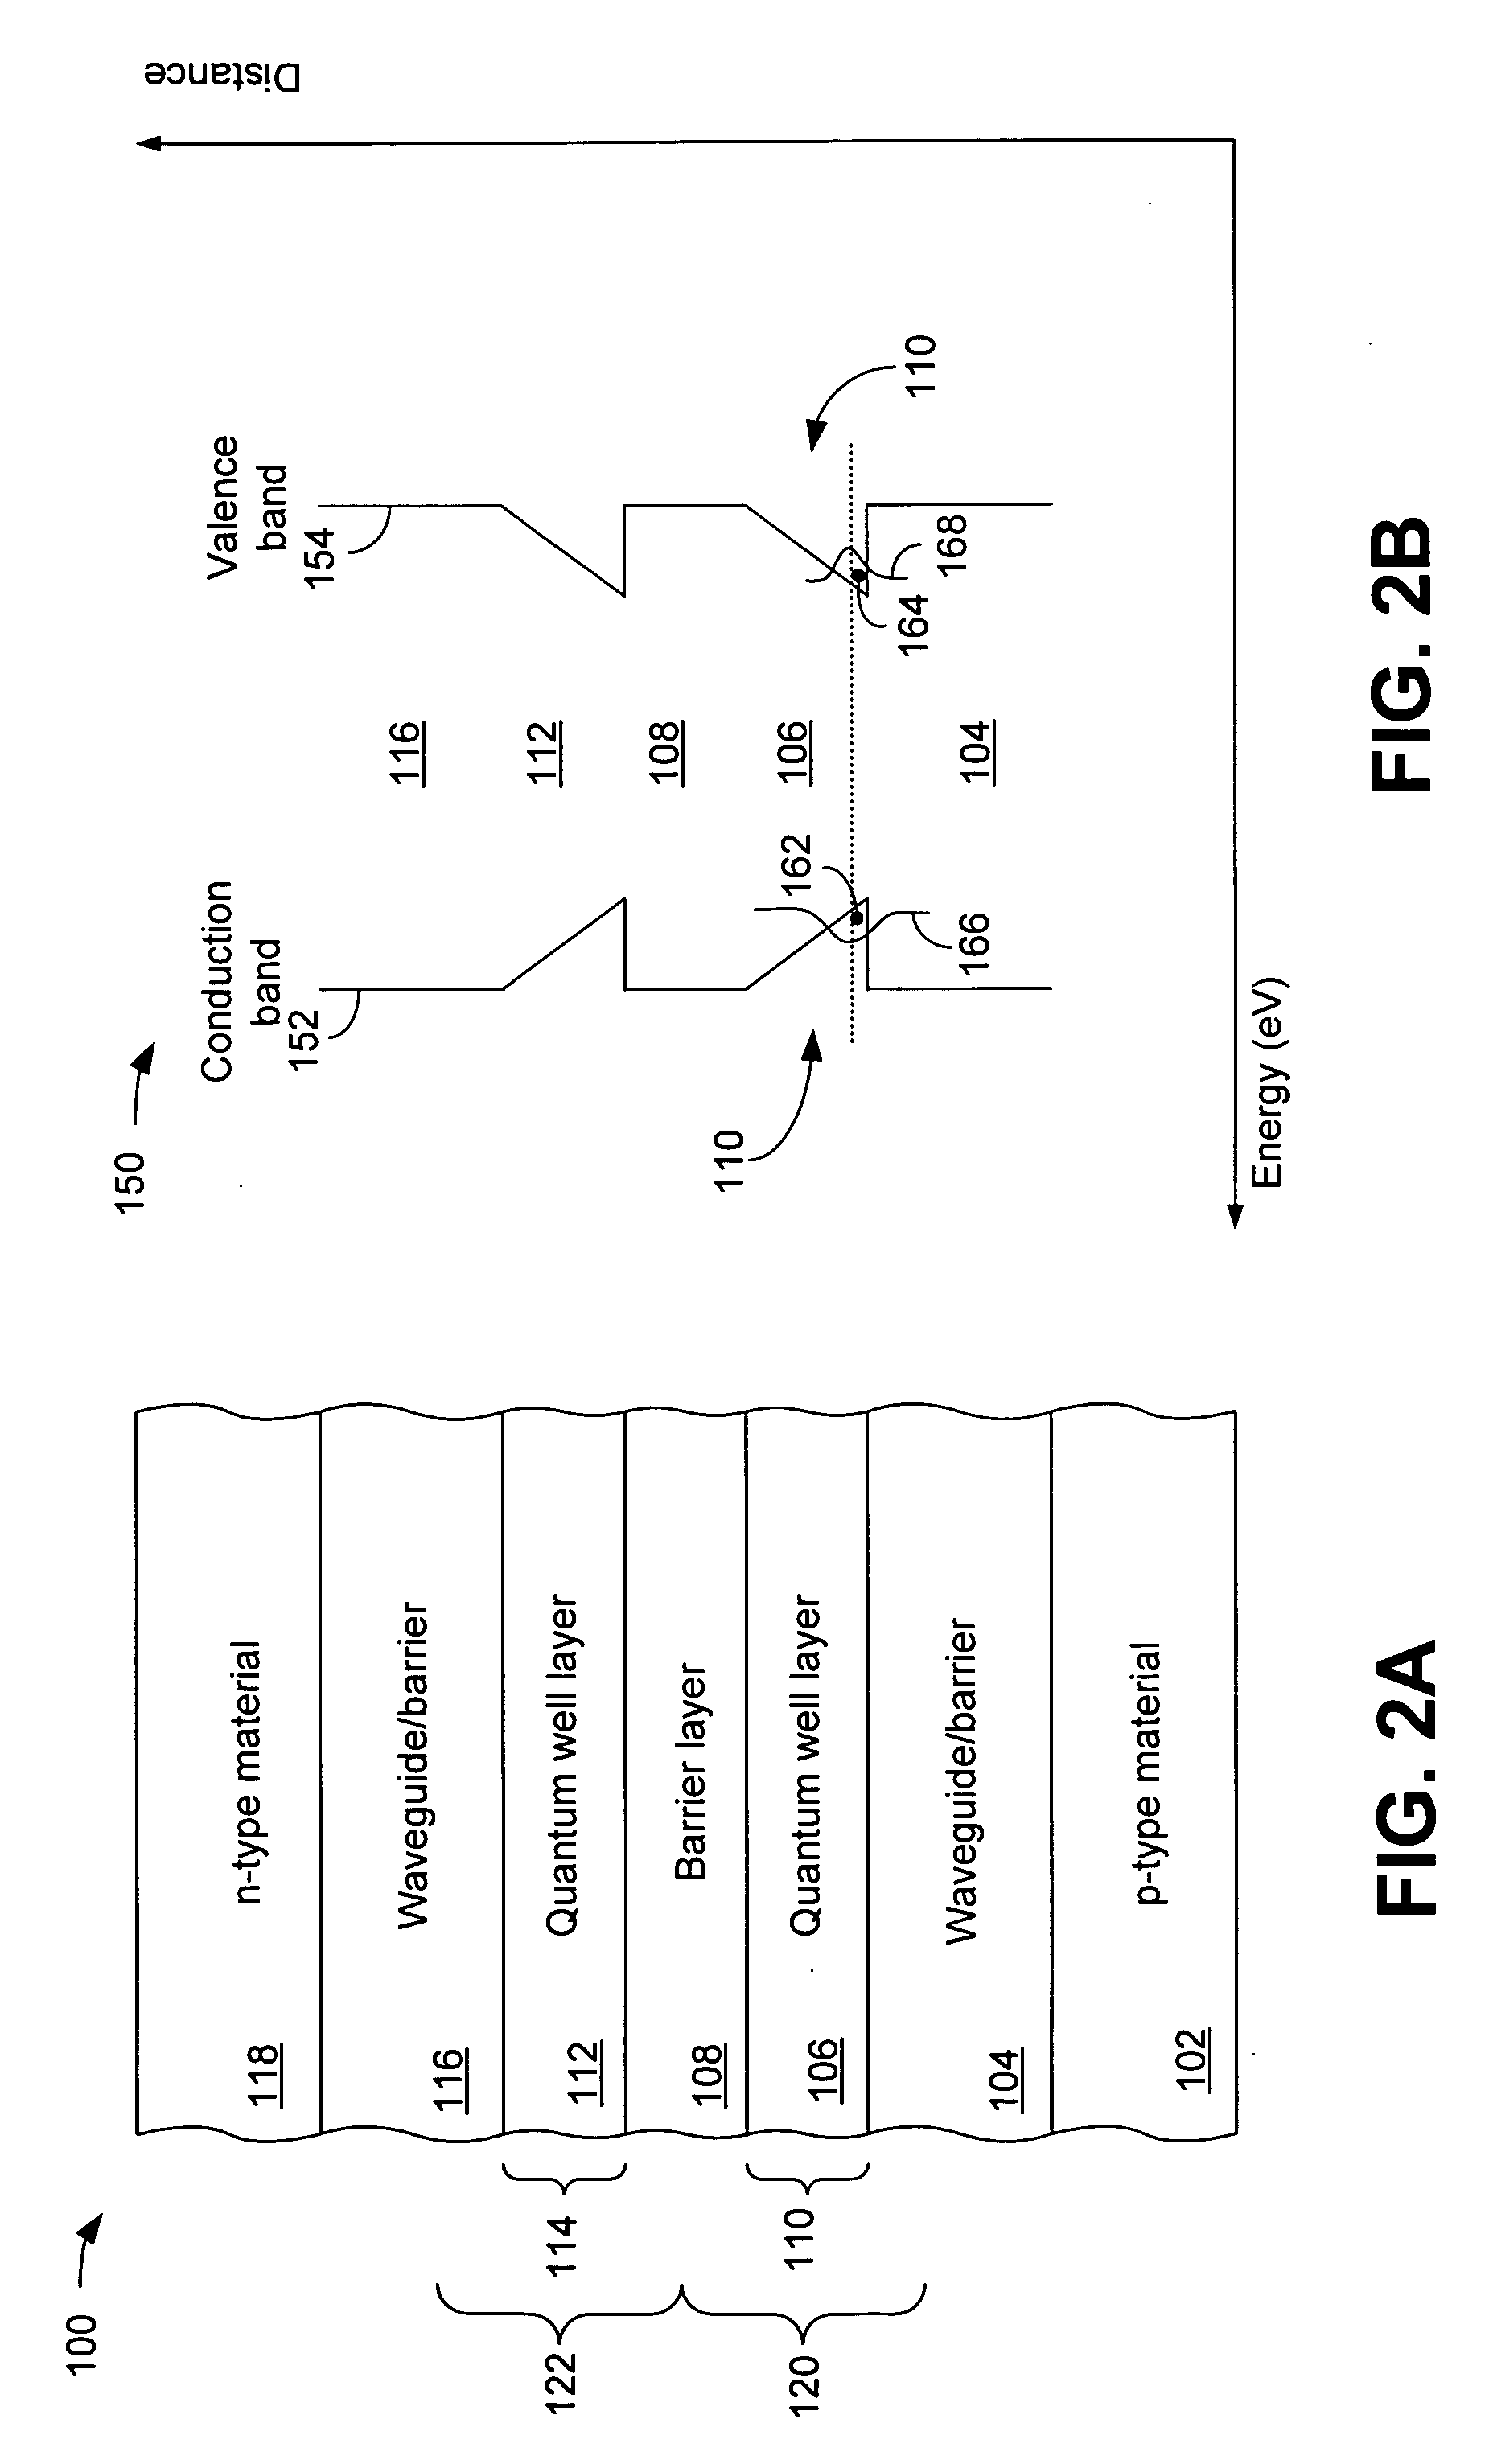 Semiconductor optical modulator having a quantum well structure for increasing effective photocurrent generating capability